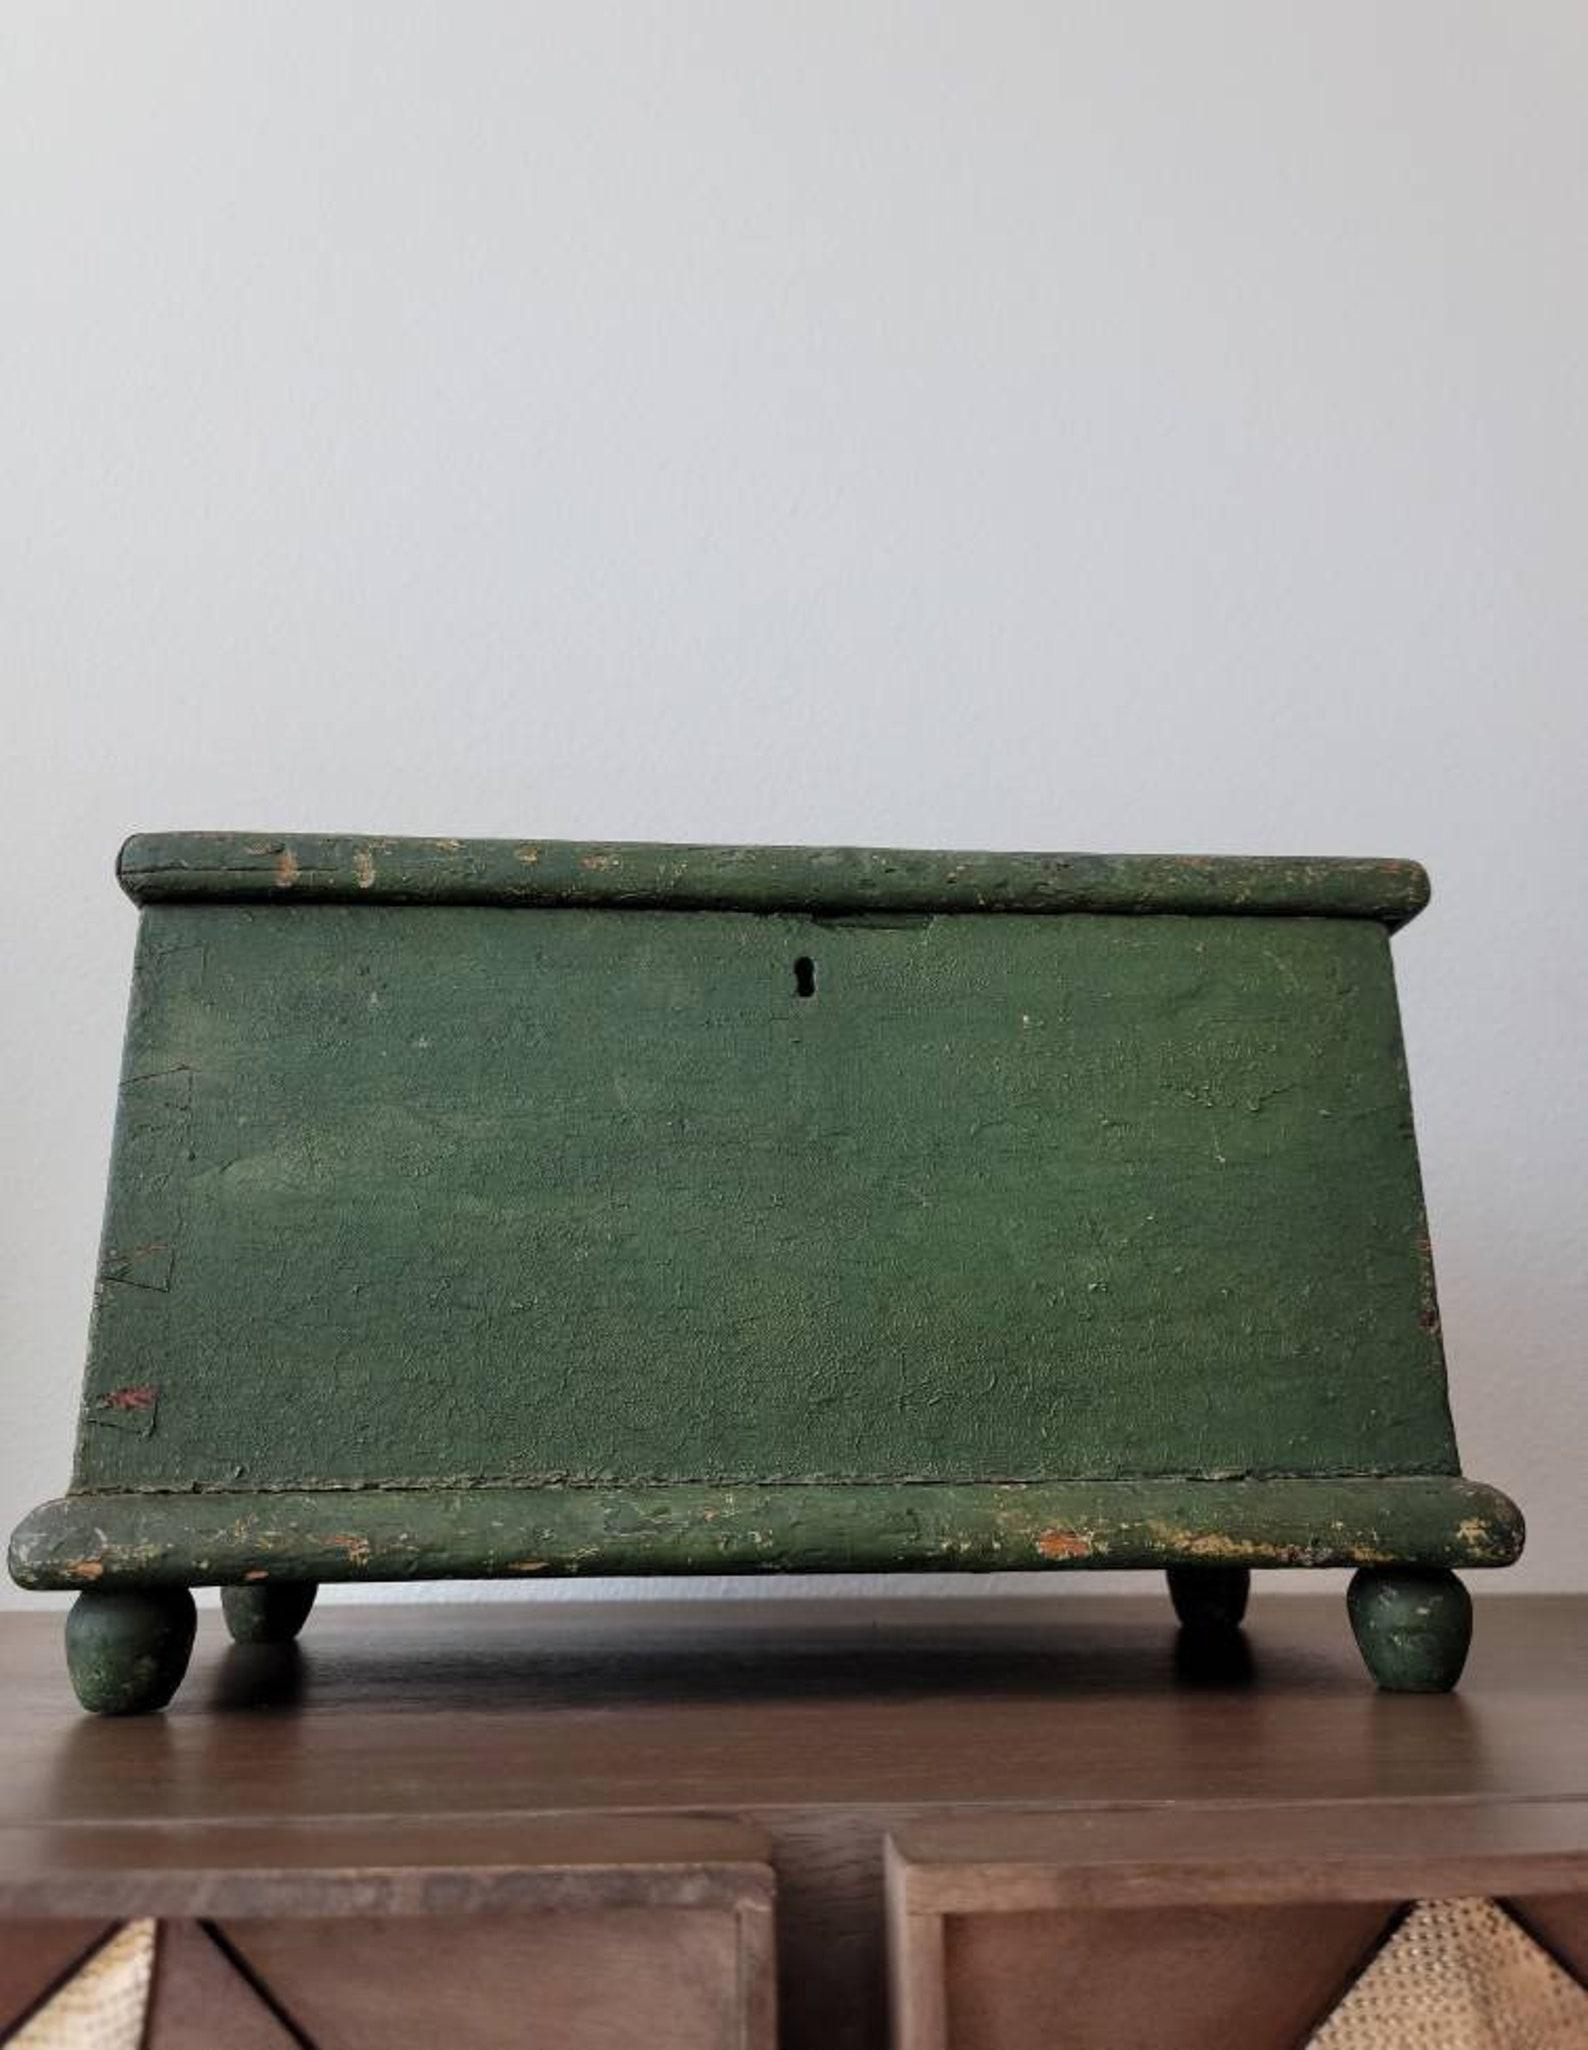 A charming early American farmhouse country painted pine miniature blanket chest / dowry / table box. Born in the Northeastern United States, possibly Pennsylvania, in the early 19th century, featuring a hand cut dovetailed rectangular case with